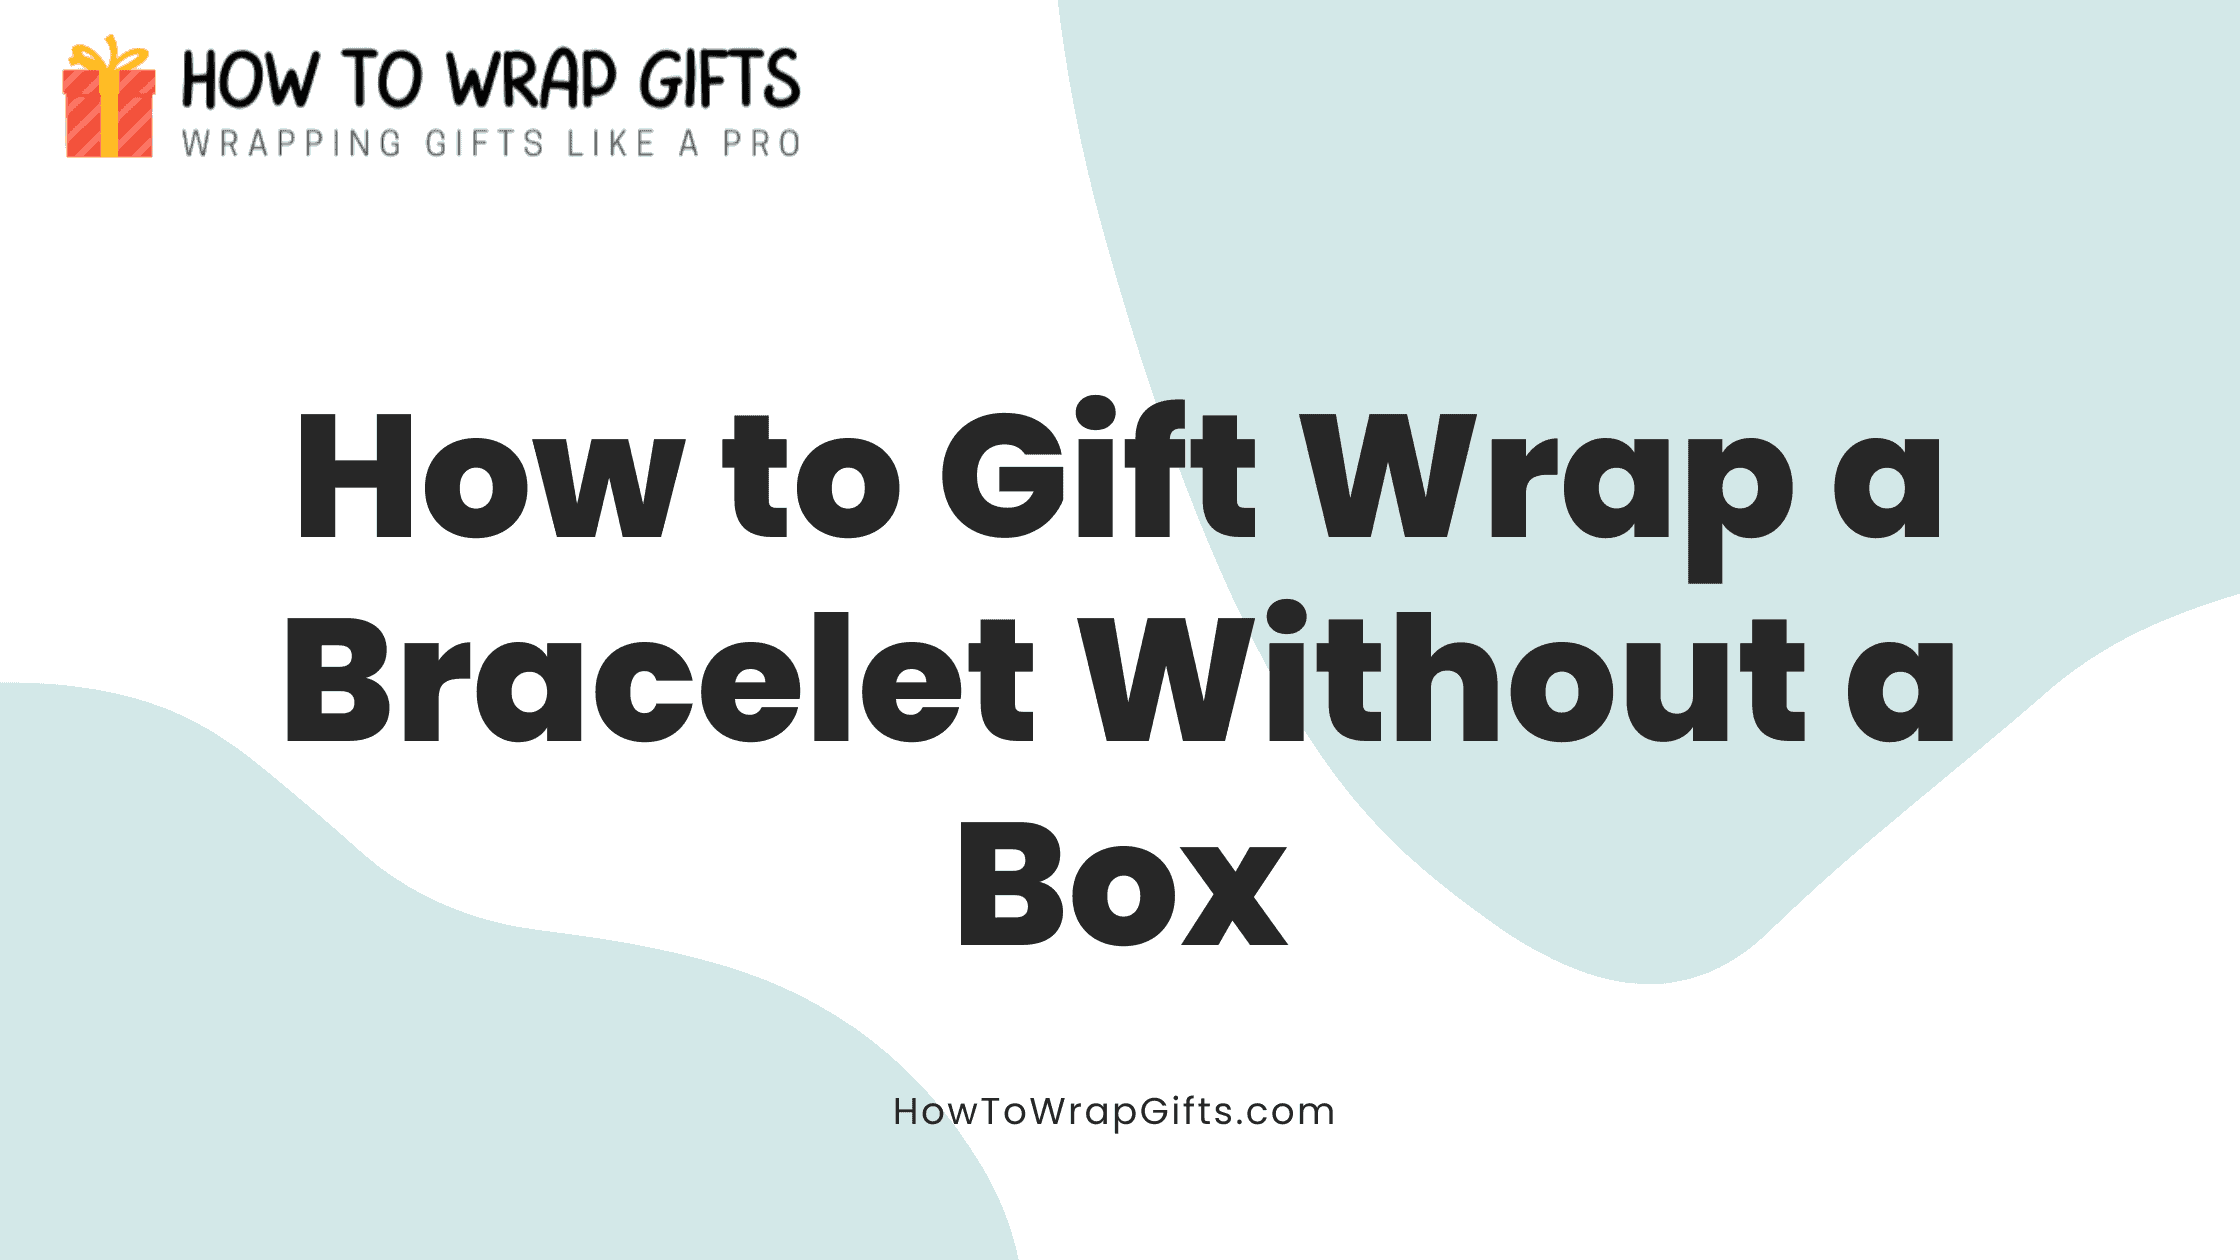 How to Gift Wrap a Bracelet Without a Box